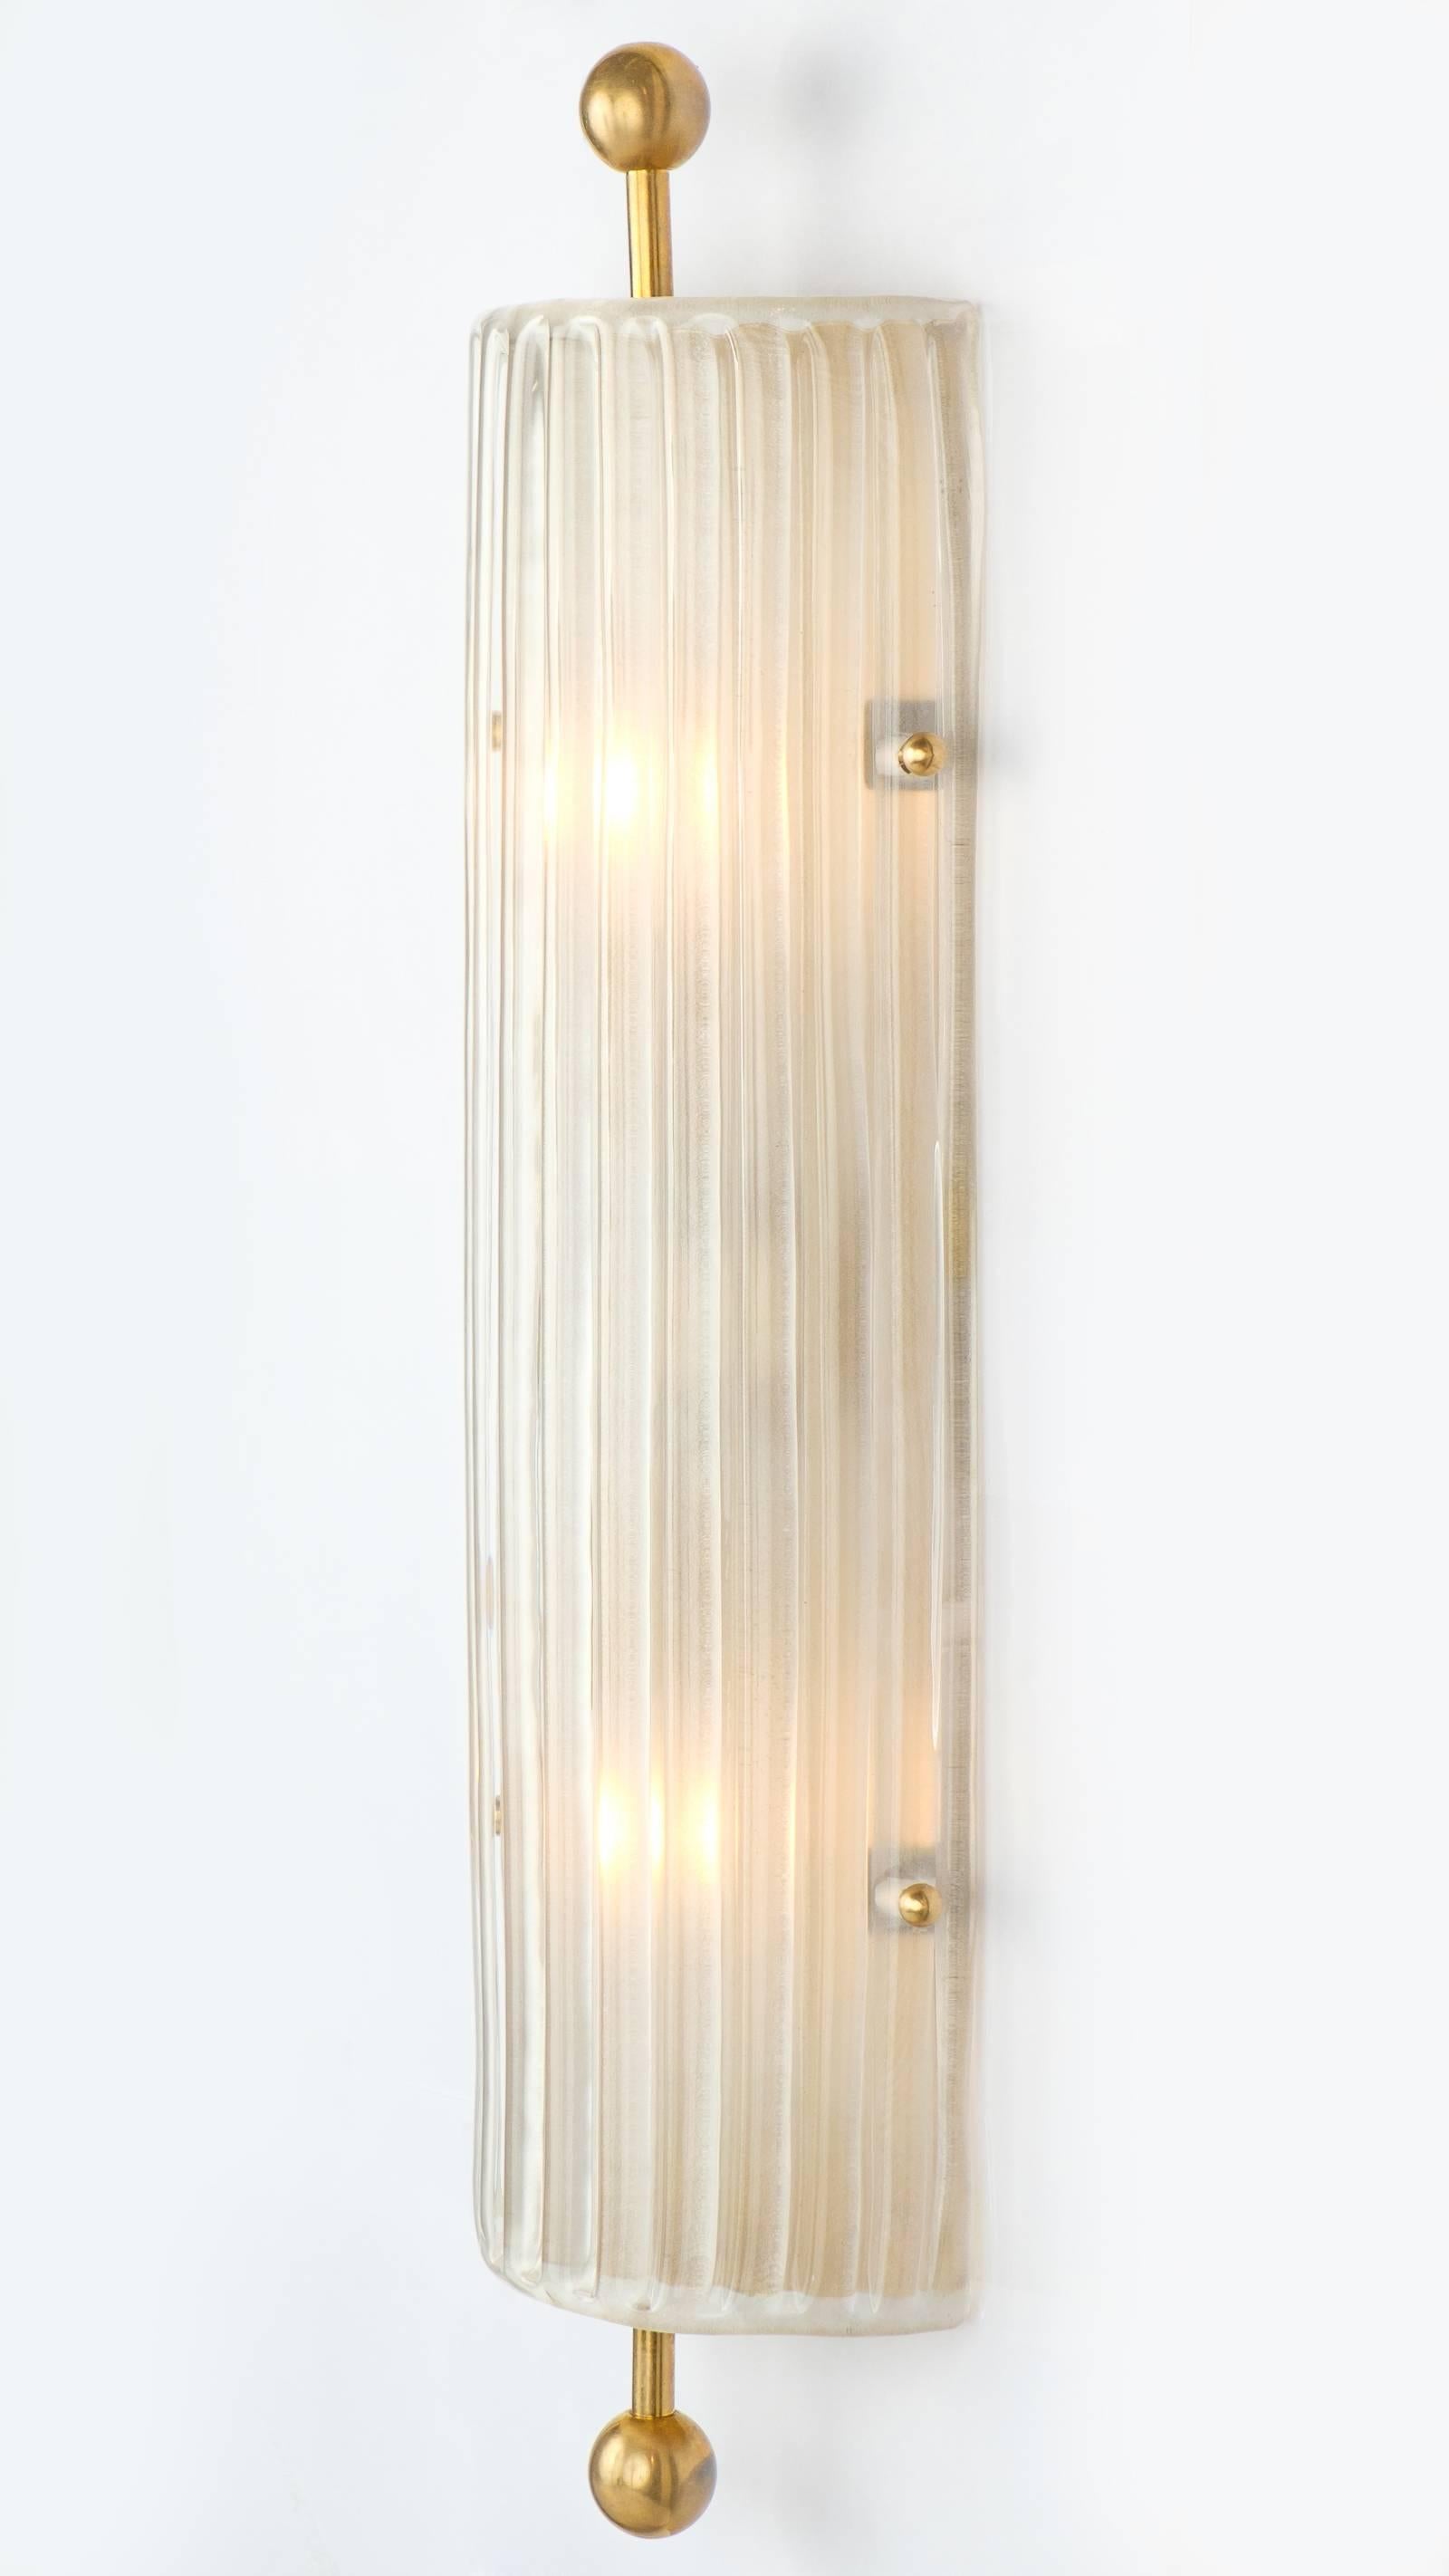 A pair of elegant elongated Art Deco style Murano glass and brass finial sconces. These flush mount lighting pieces have a timeless structure that is taken up a notch via the ribbed, textured, and frosted Murano glass. Each sconce requires two